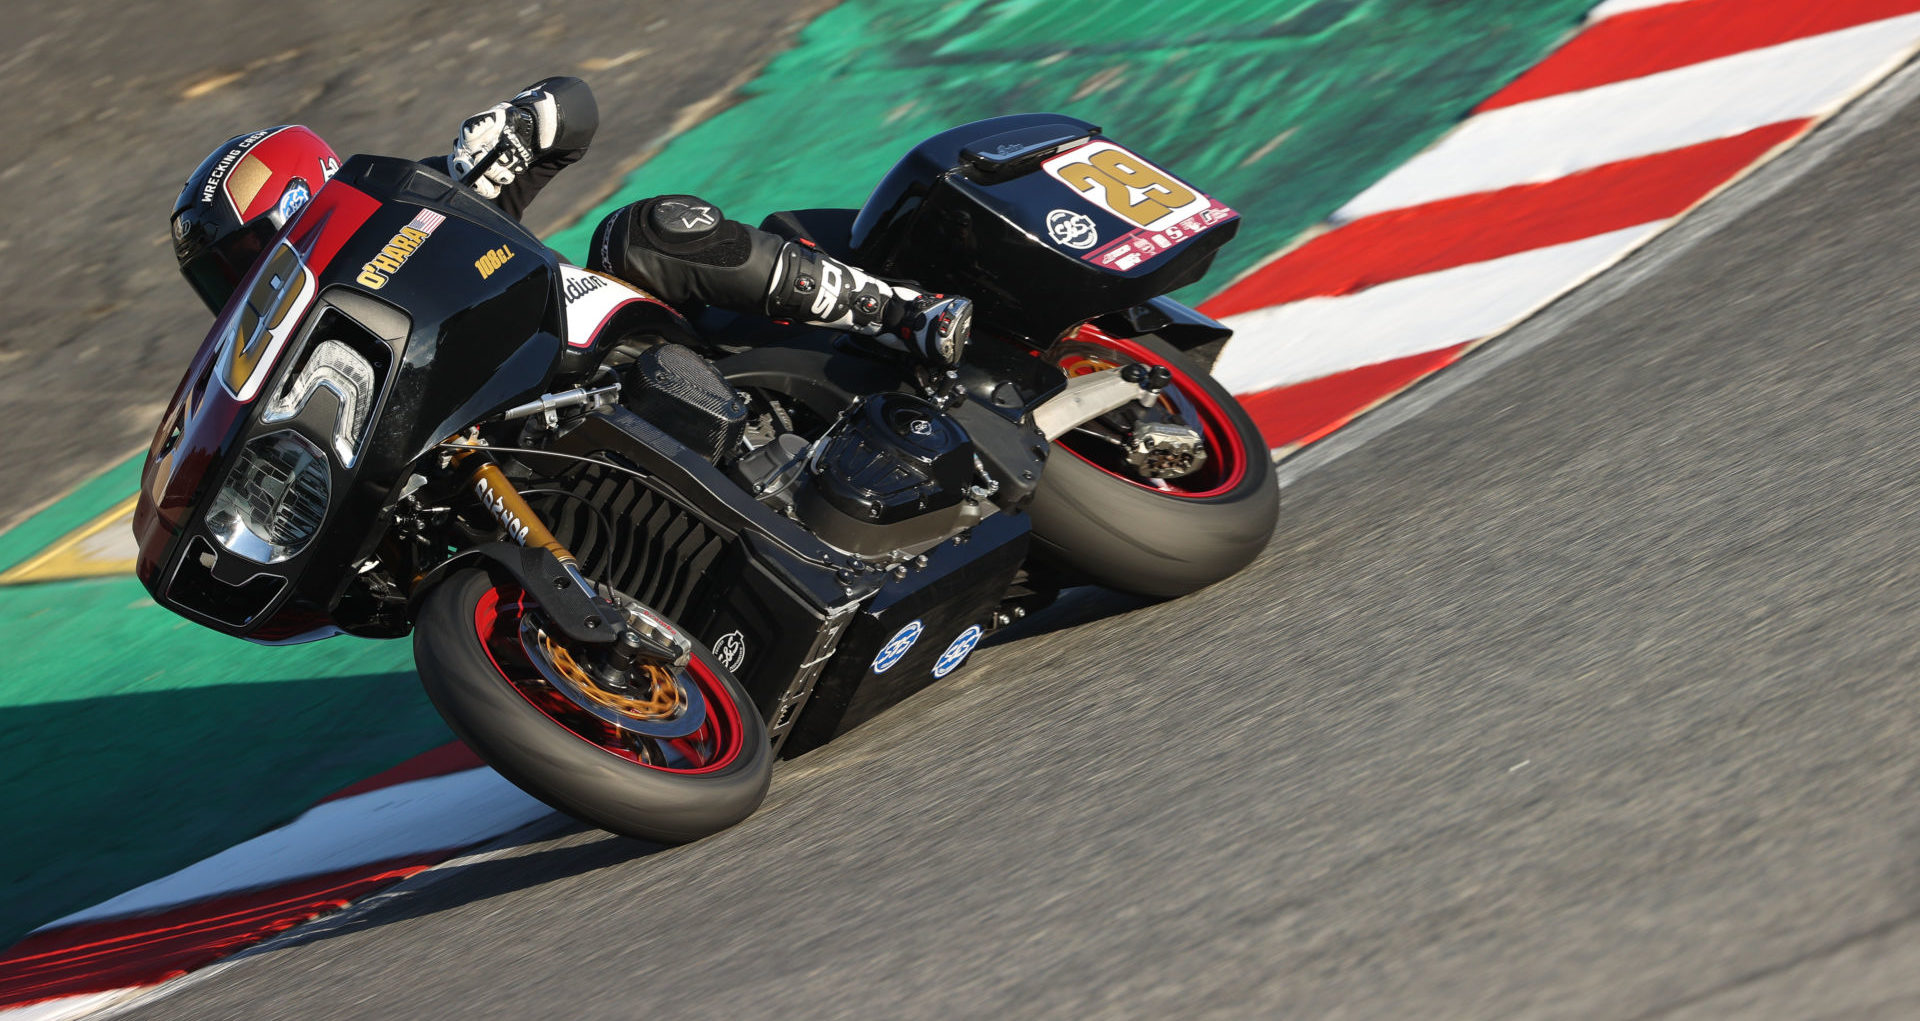 A view of a racer on the King of the baggers racing series, which is slotted for six seasons this season